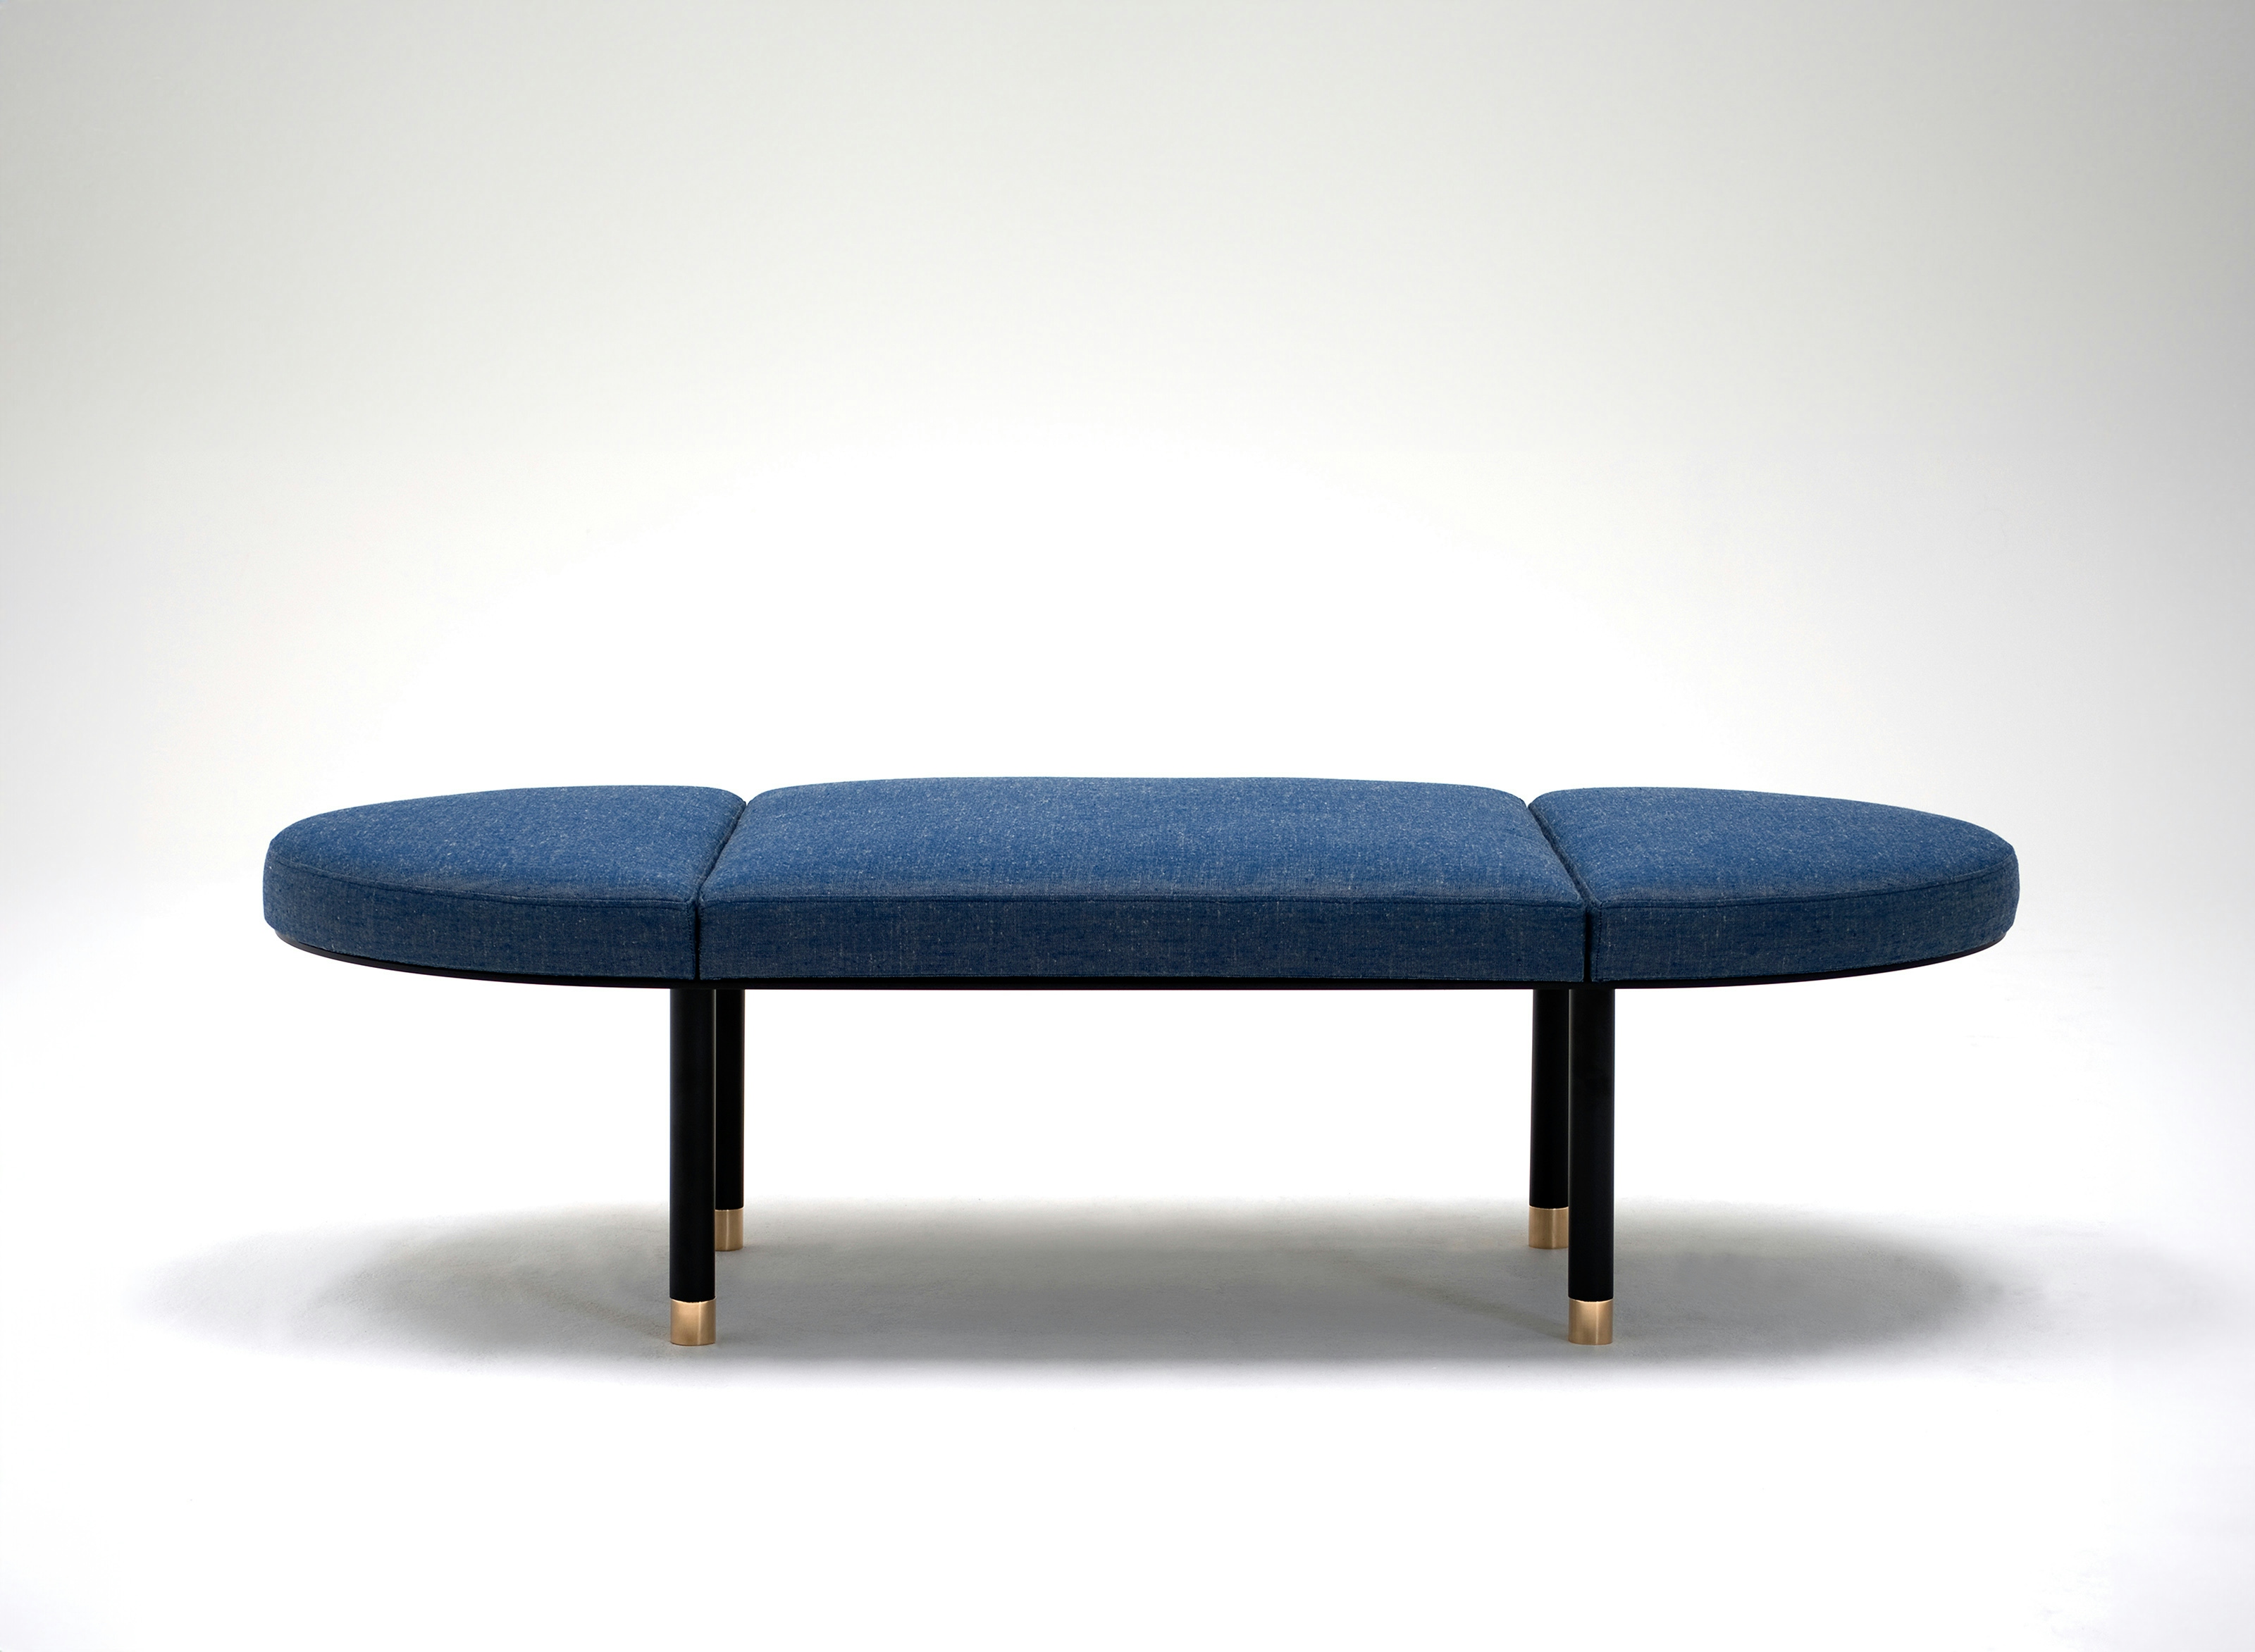 Phase Design Reza Feiz Pill Bench 1 Product Page